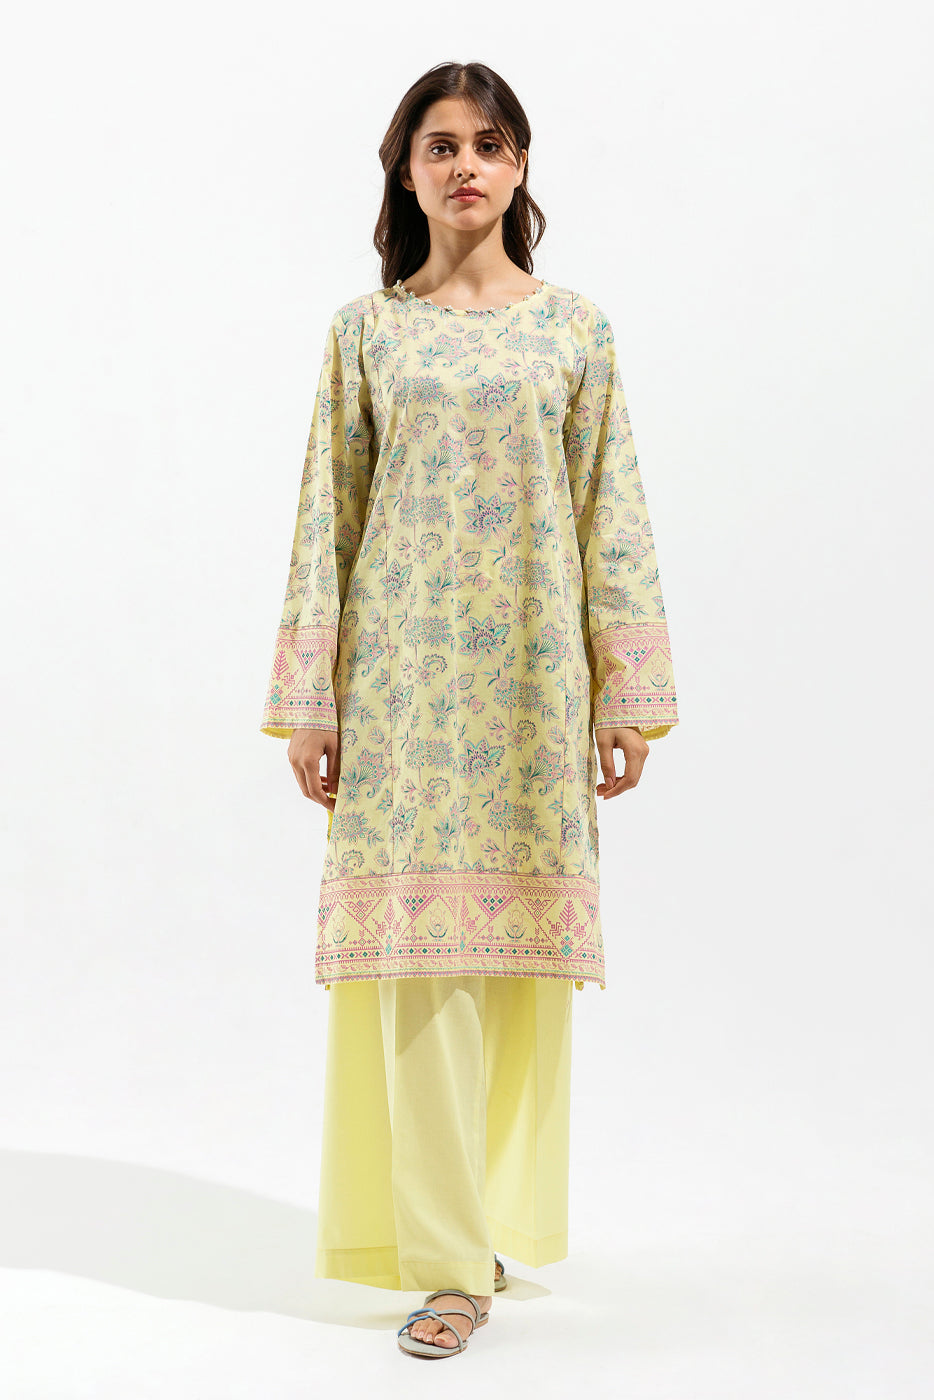 2 PIECE - PRINTED LAWN SUIT - LIME JACOBEAN (UNSTITCHED) - BEECHTREE